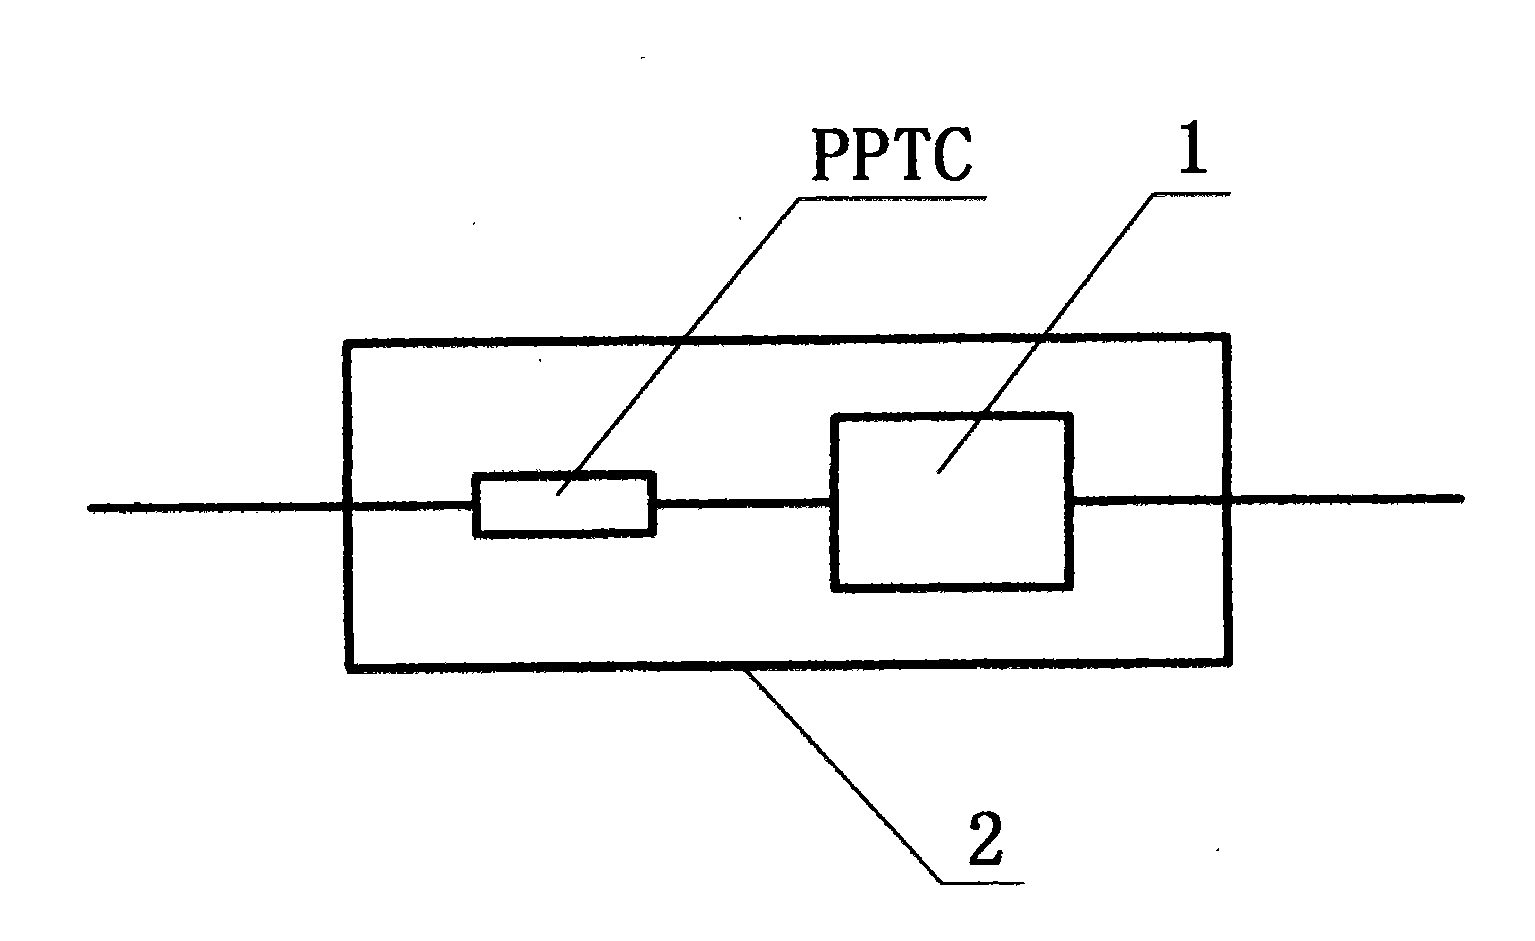 Circuit breaker switching off/on coil with self-protection function